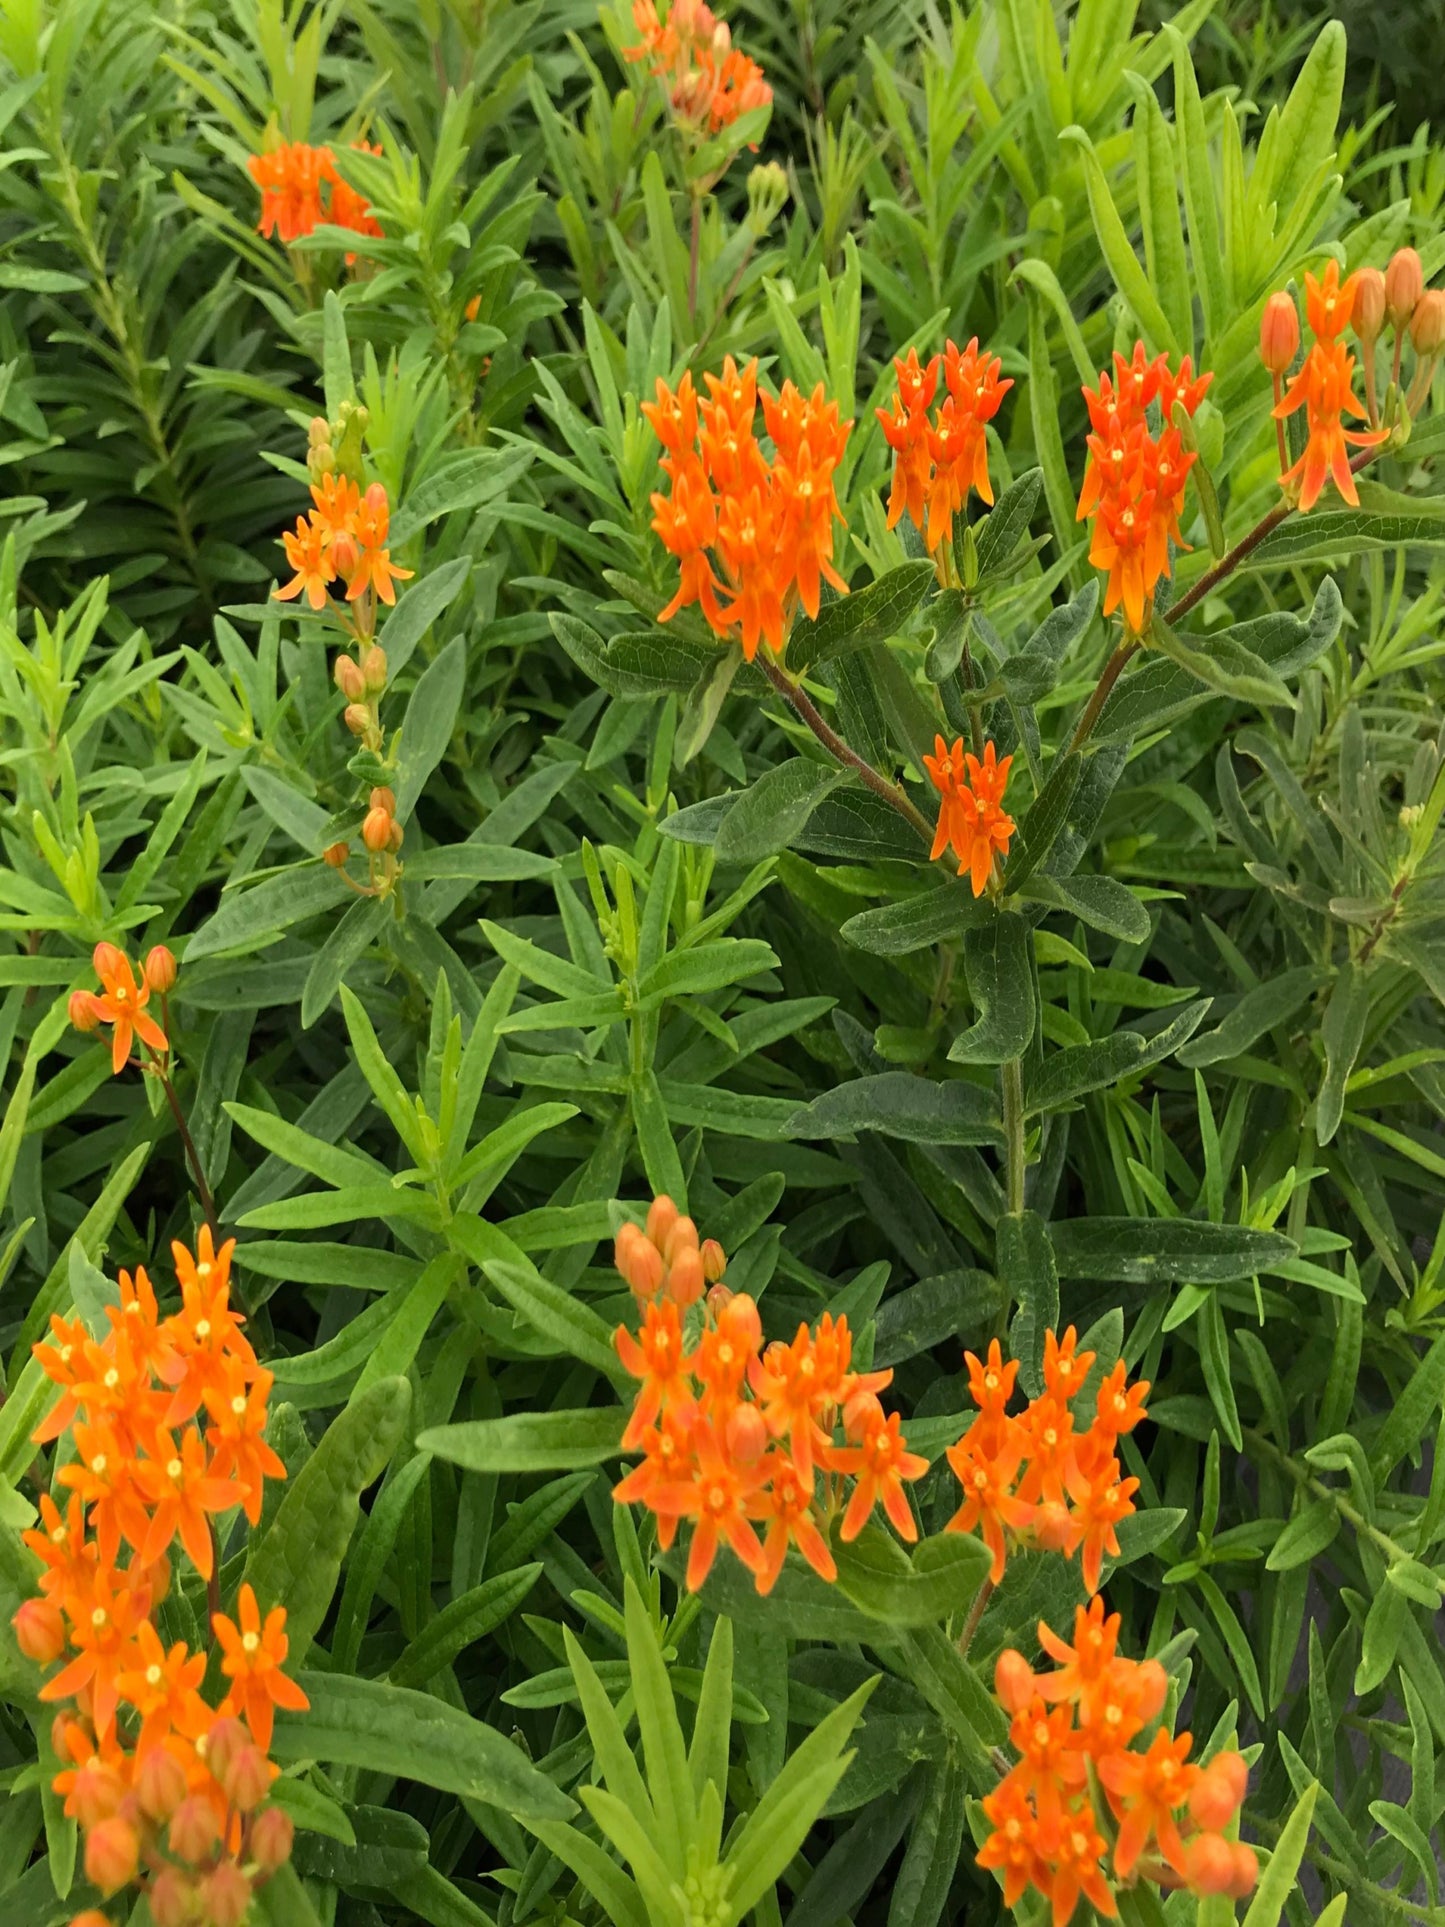 asclepias tuberosa " butterfly milkweed" host plant for monarch, queen, soldier butterfly